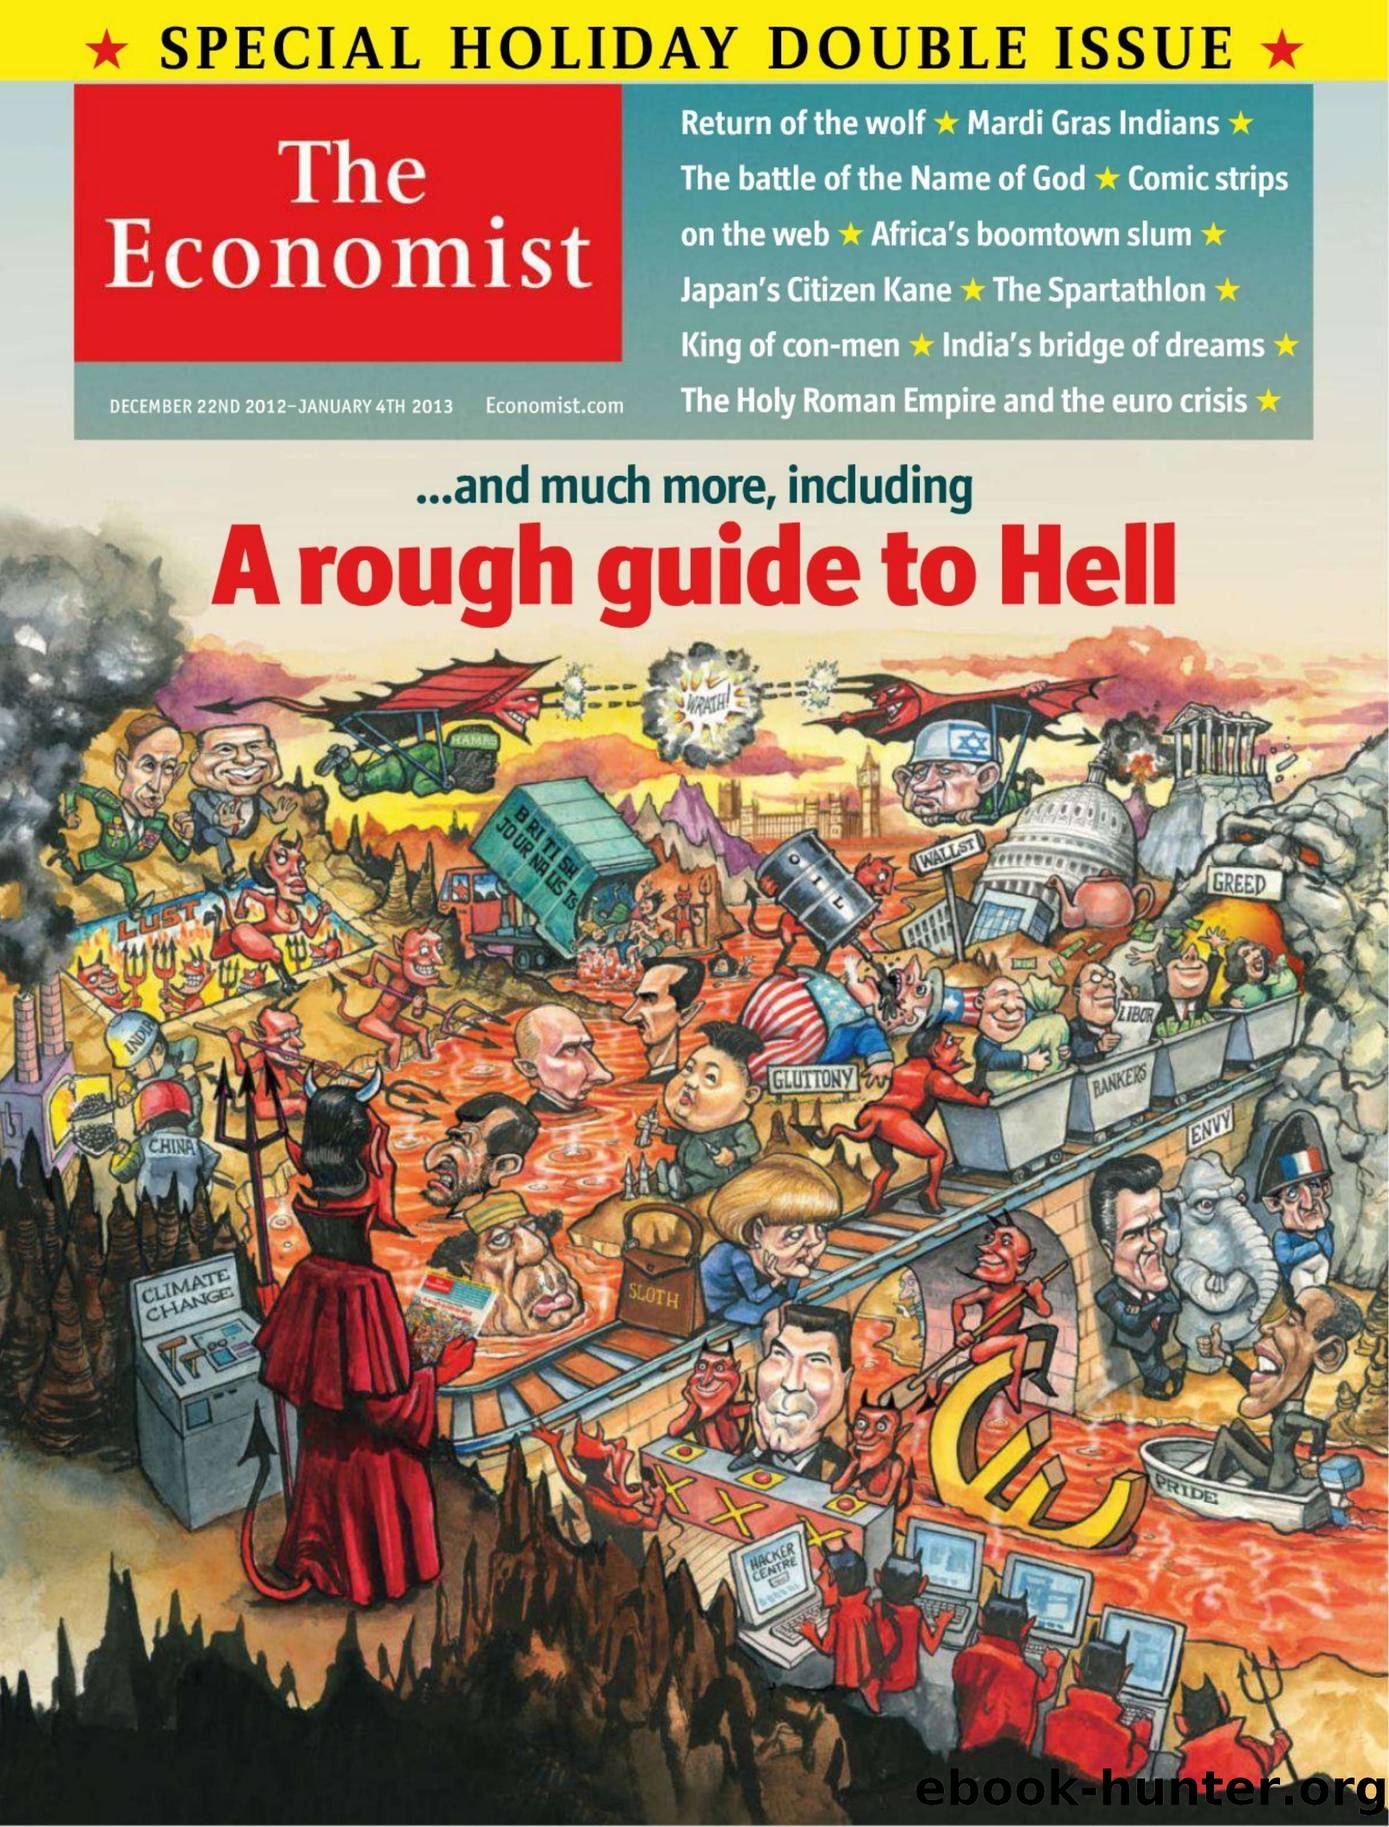 The Economist by N.8816 12-22-2012